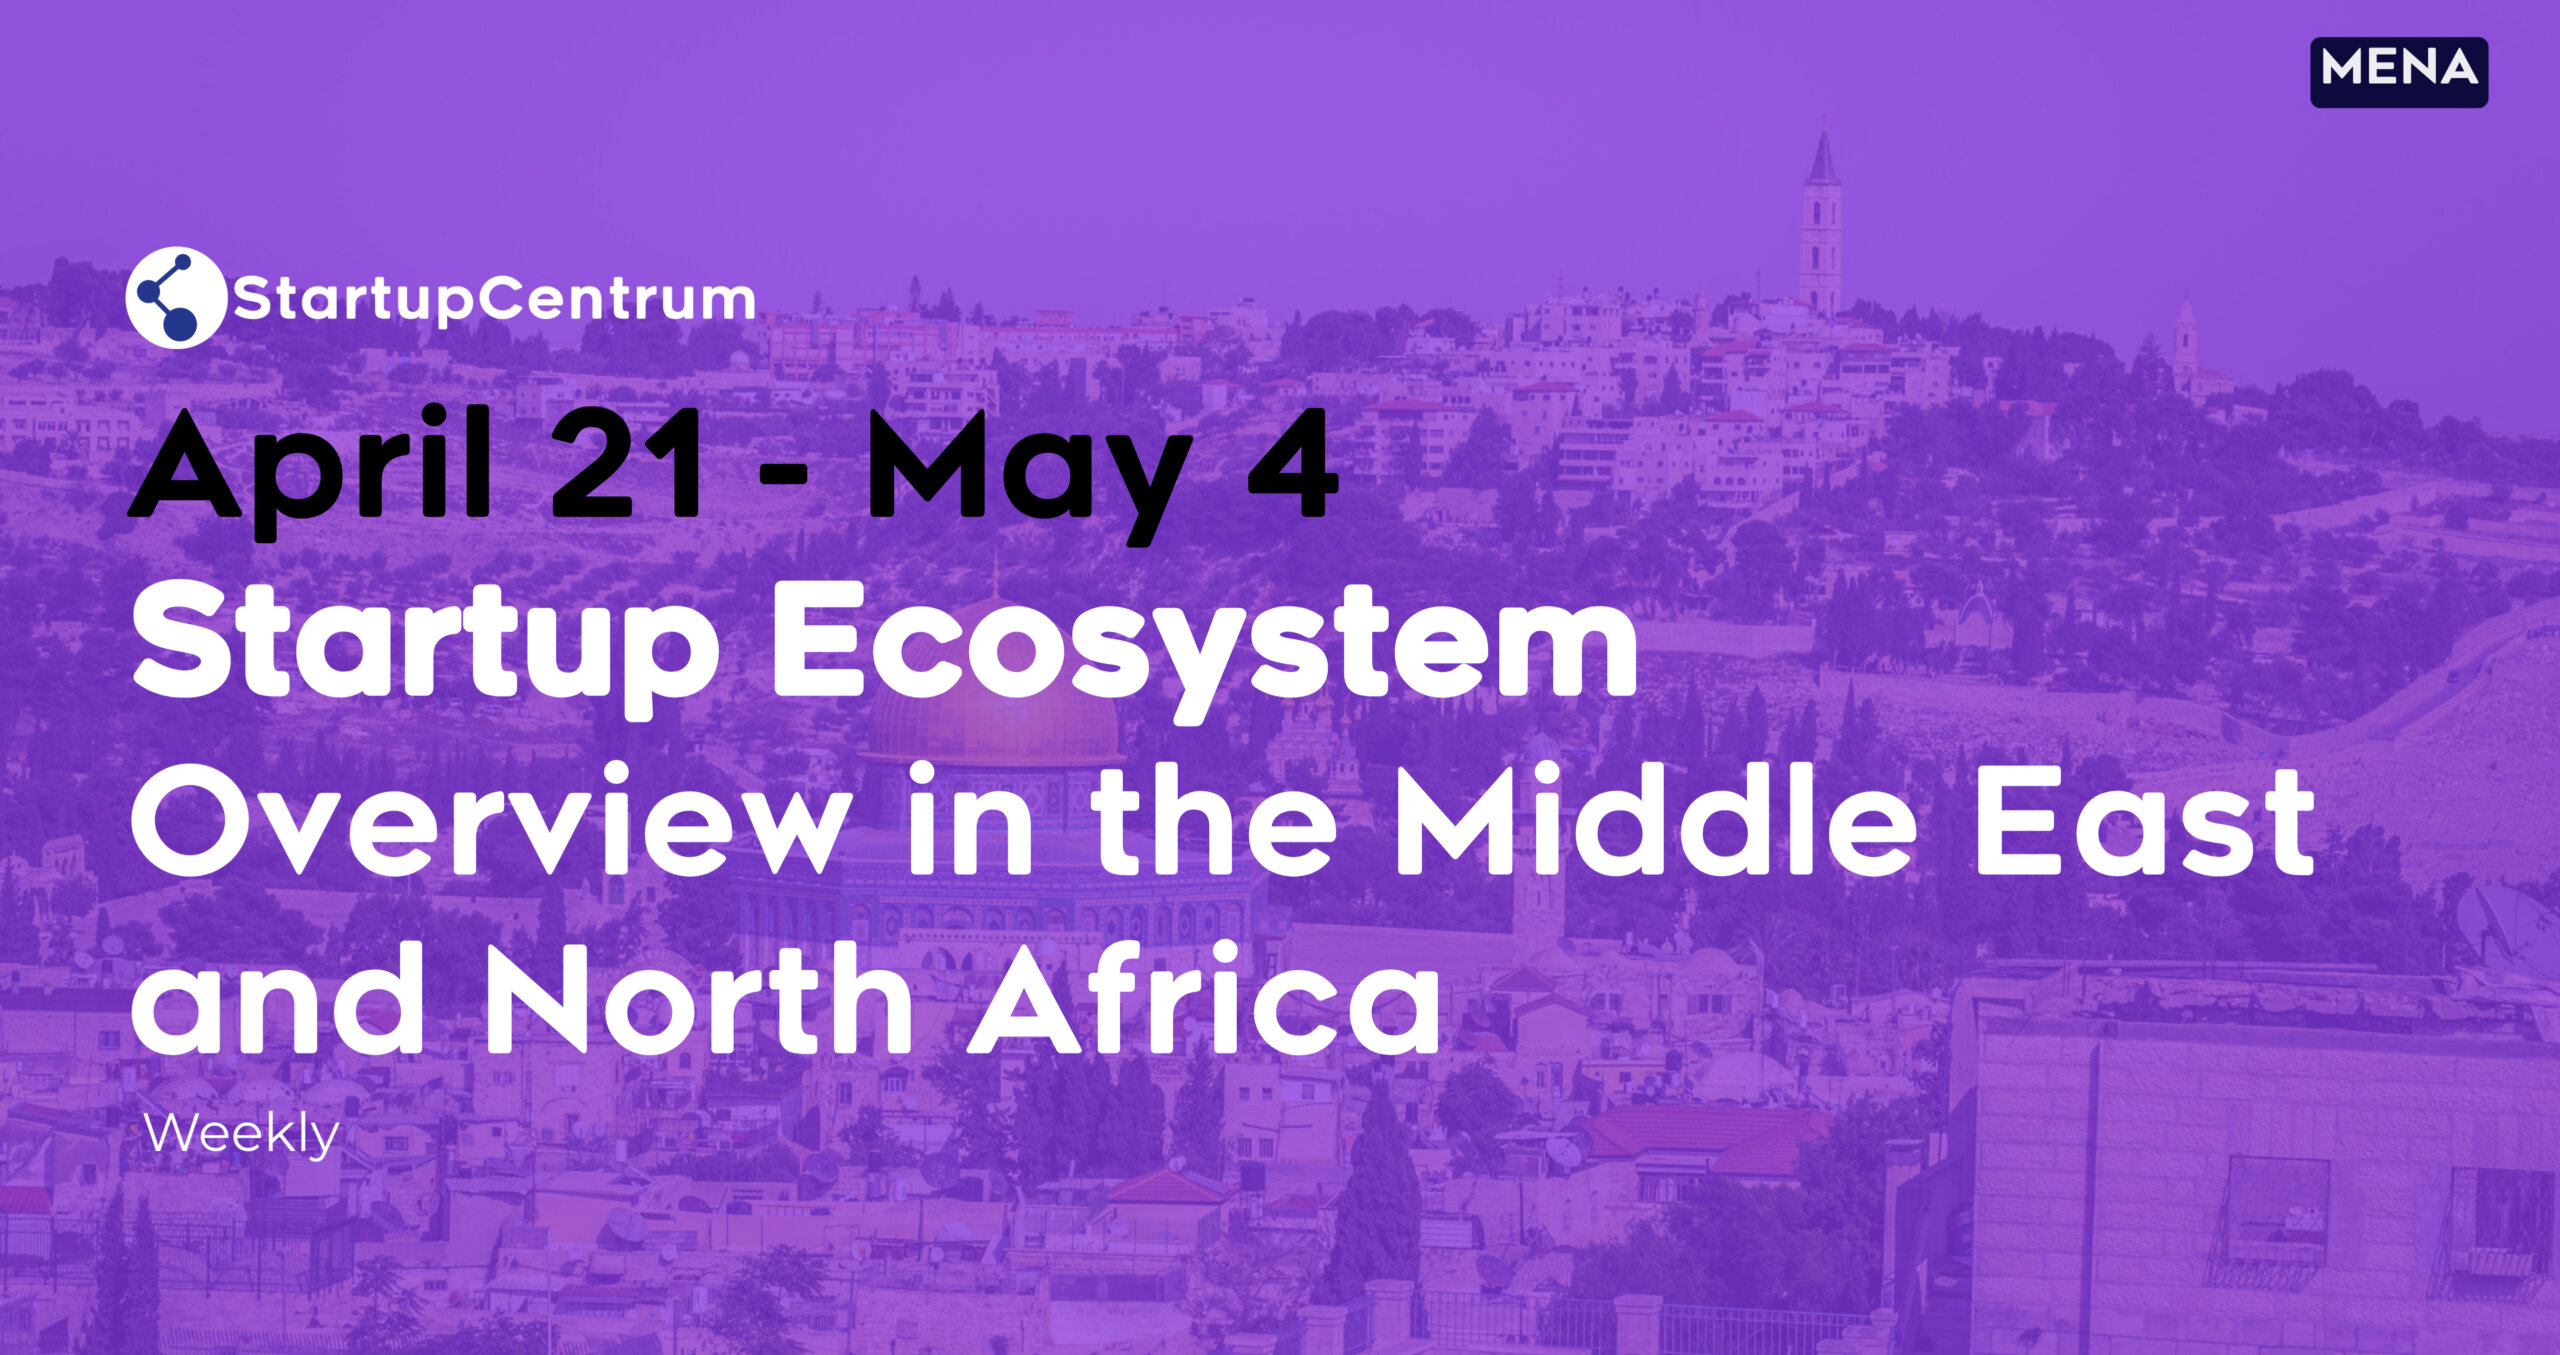 weekly-startup-ecosystem-overview-in-the-middle-east-and-north-africa